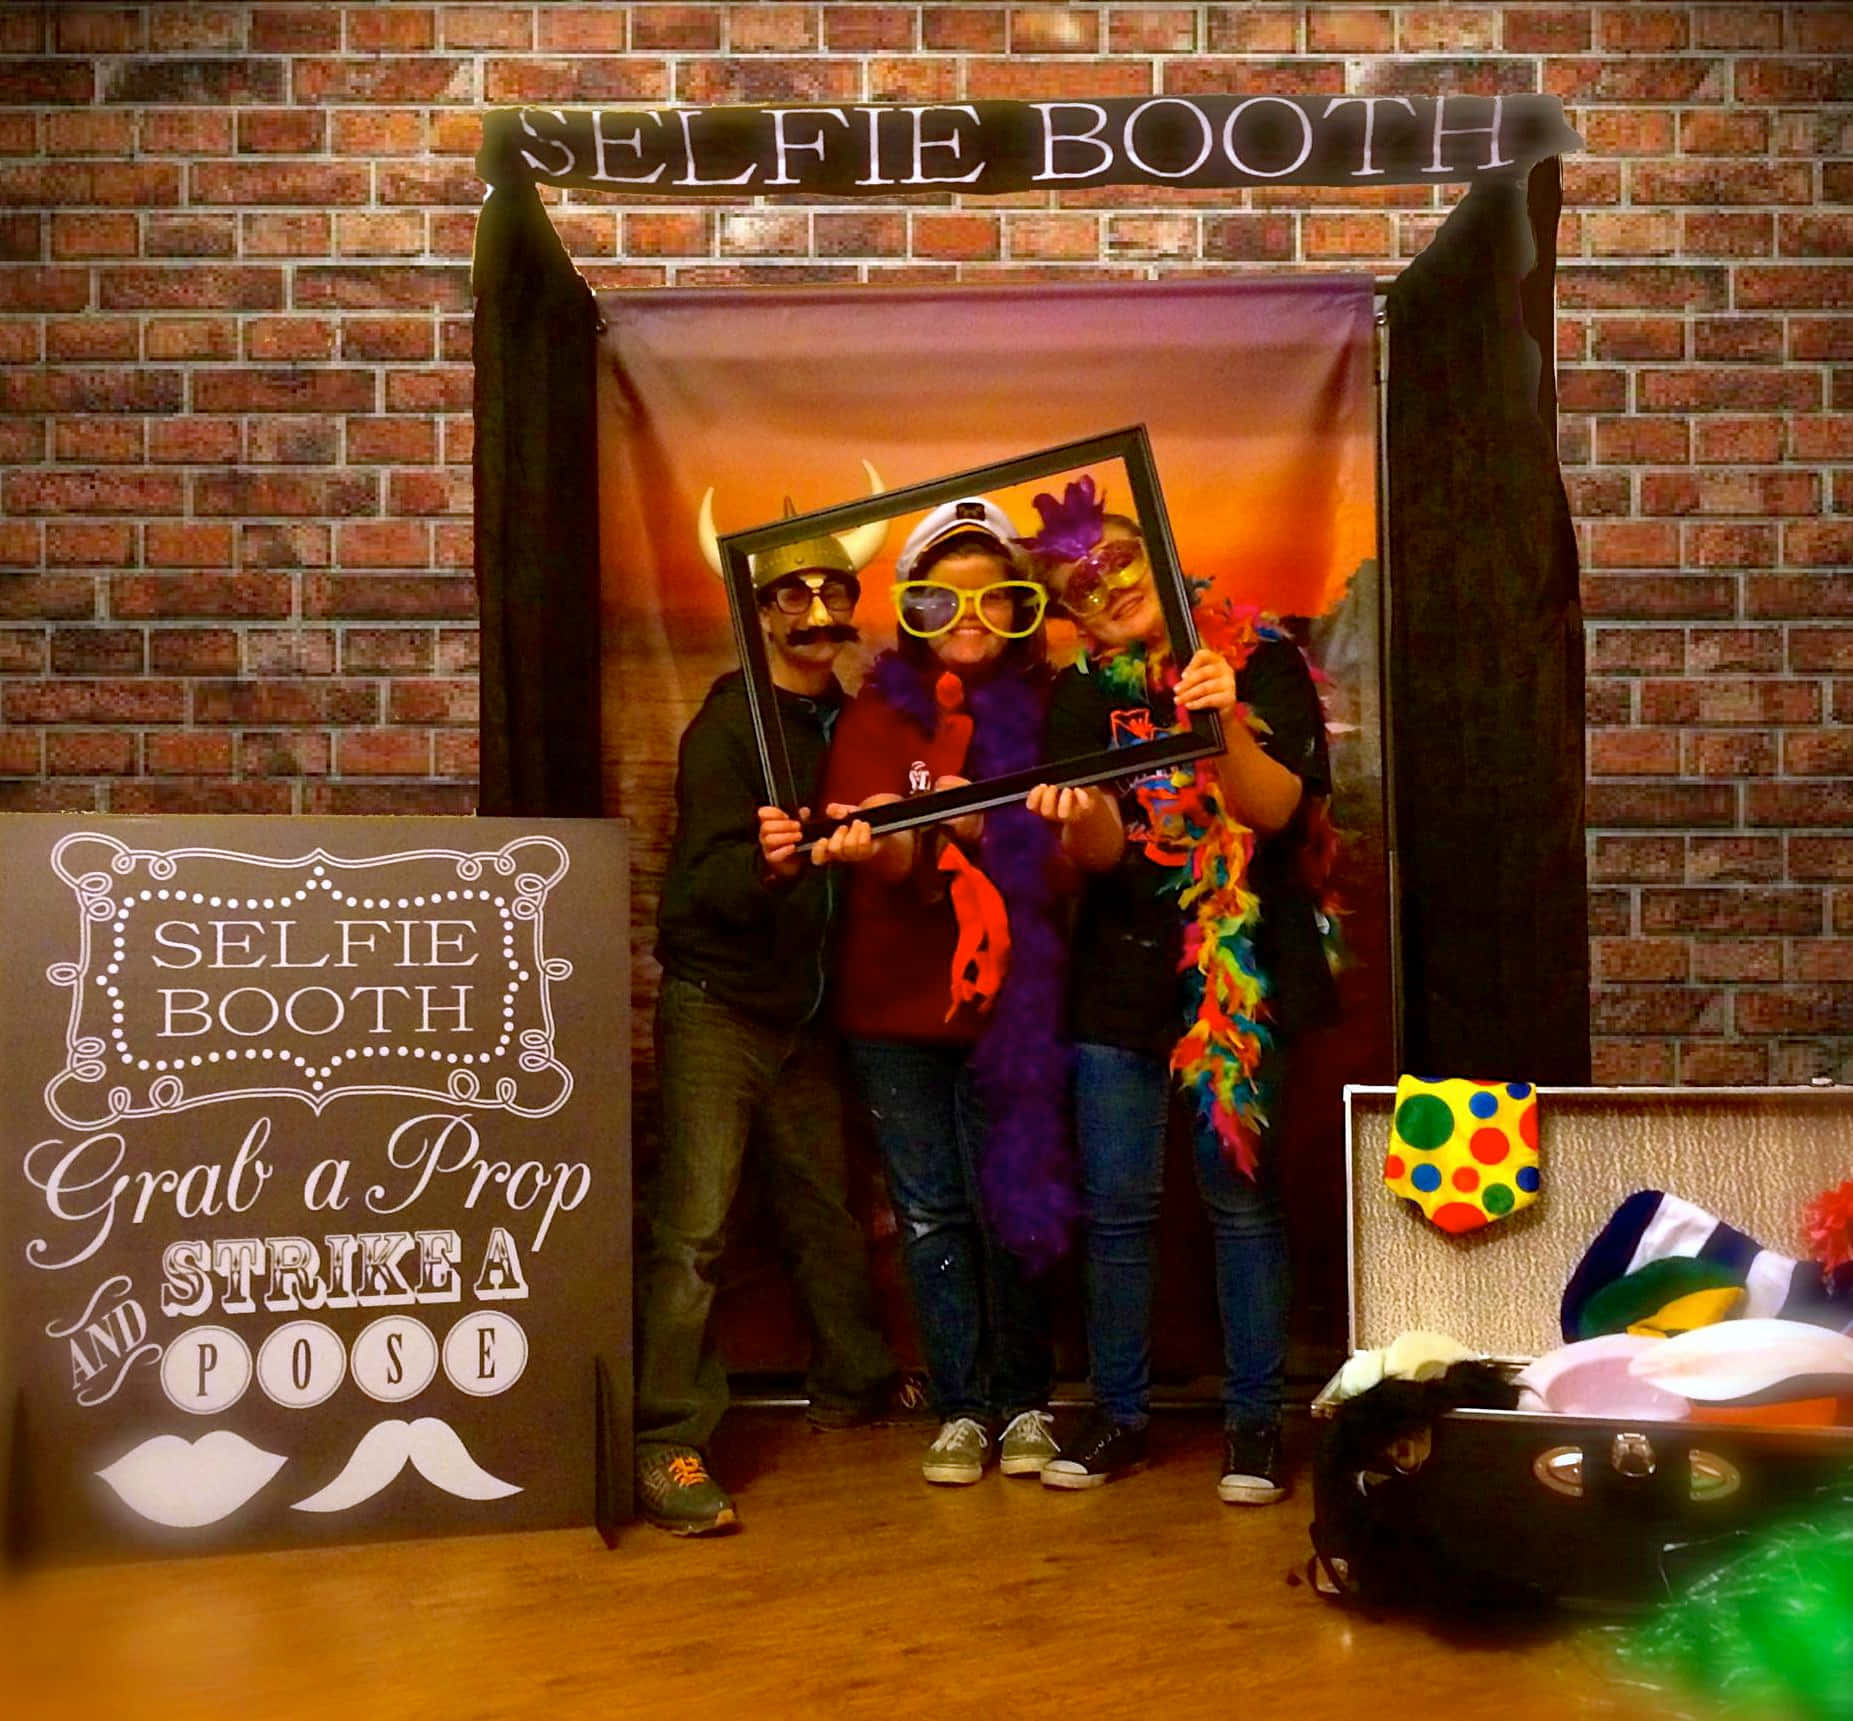 Have Fun with Friends in a Photo Booth